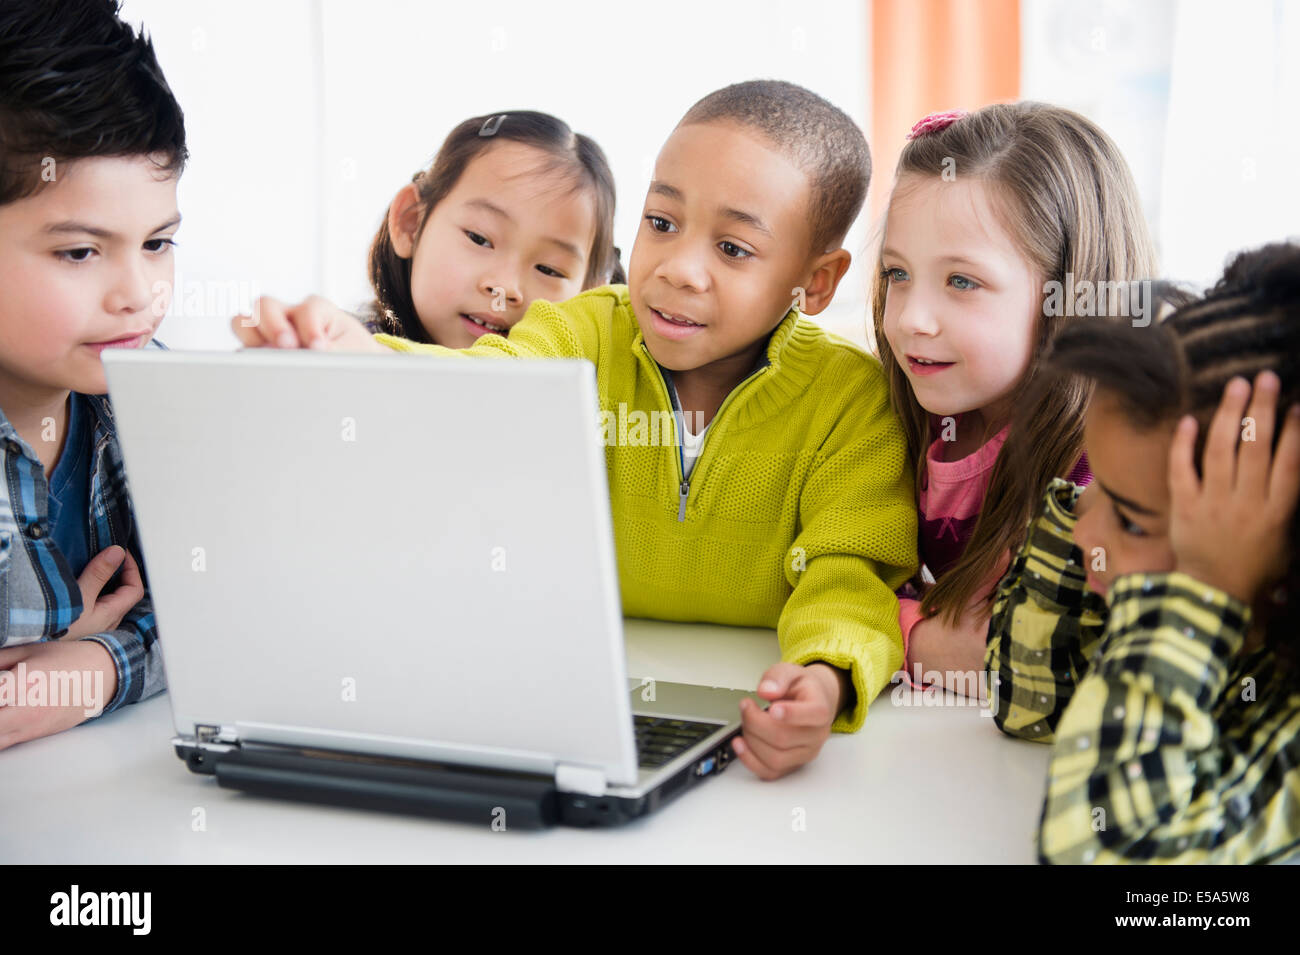 Children using laptop together Stock Photo